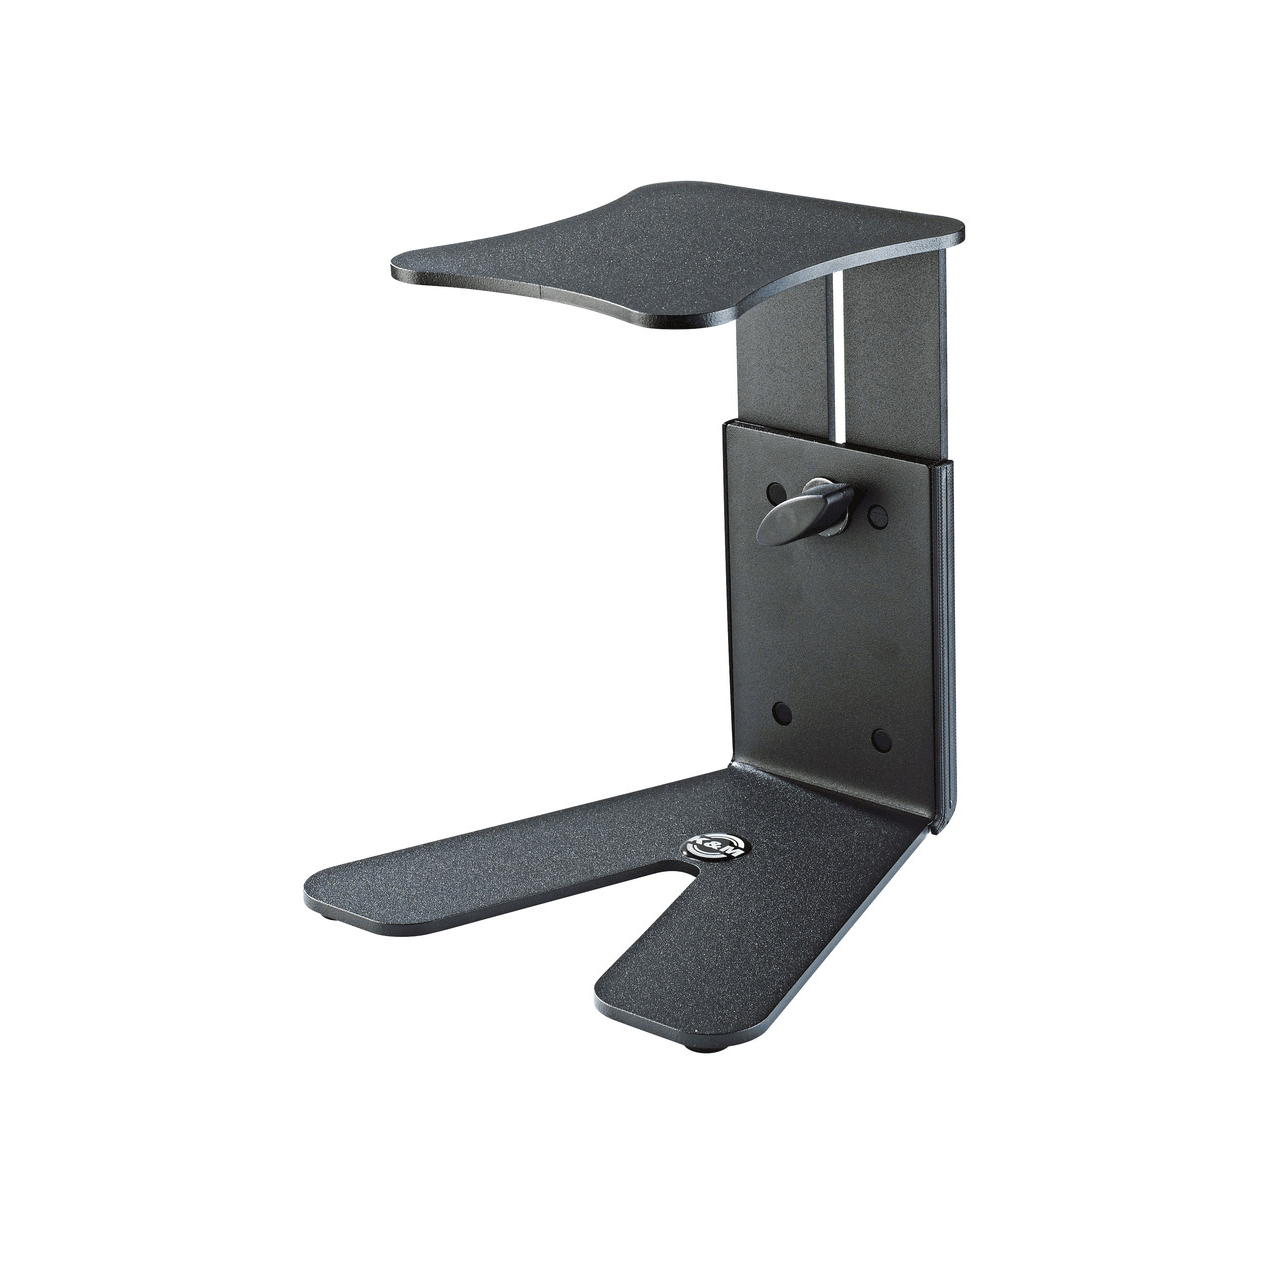 K & M Table stand for studio monitors : photo 1